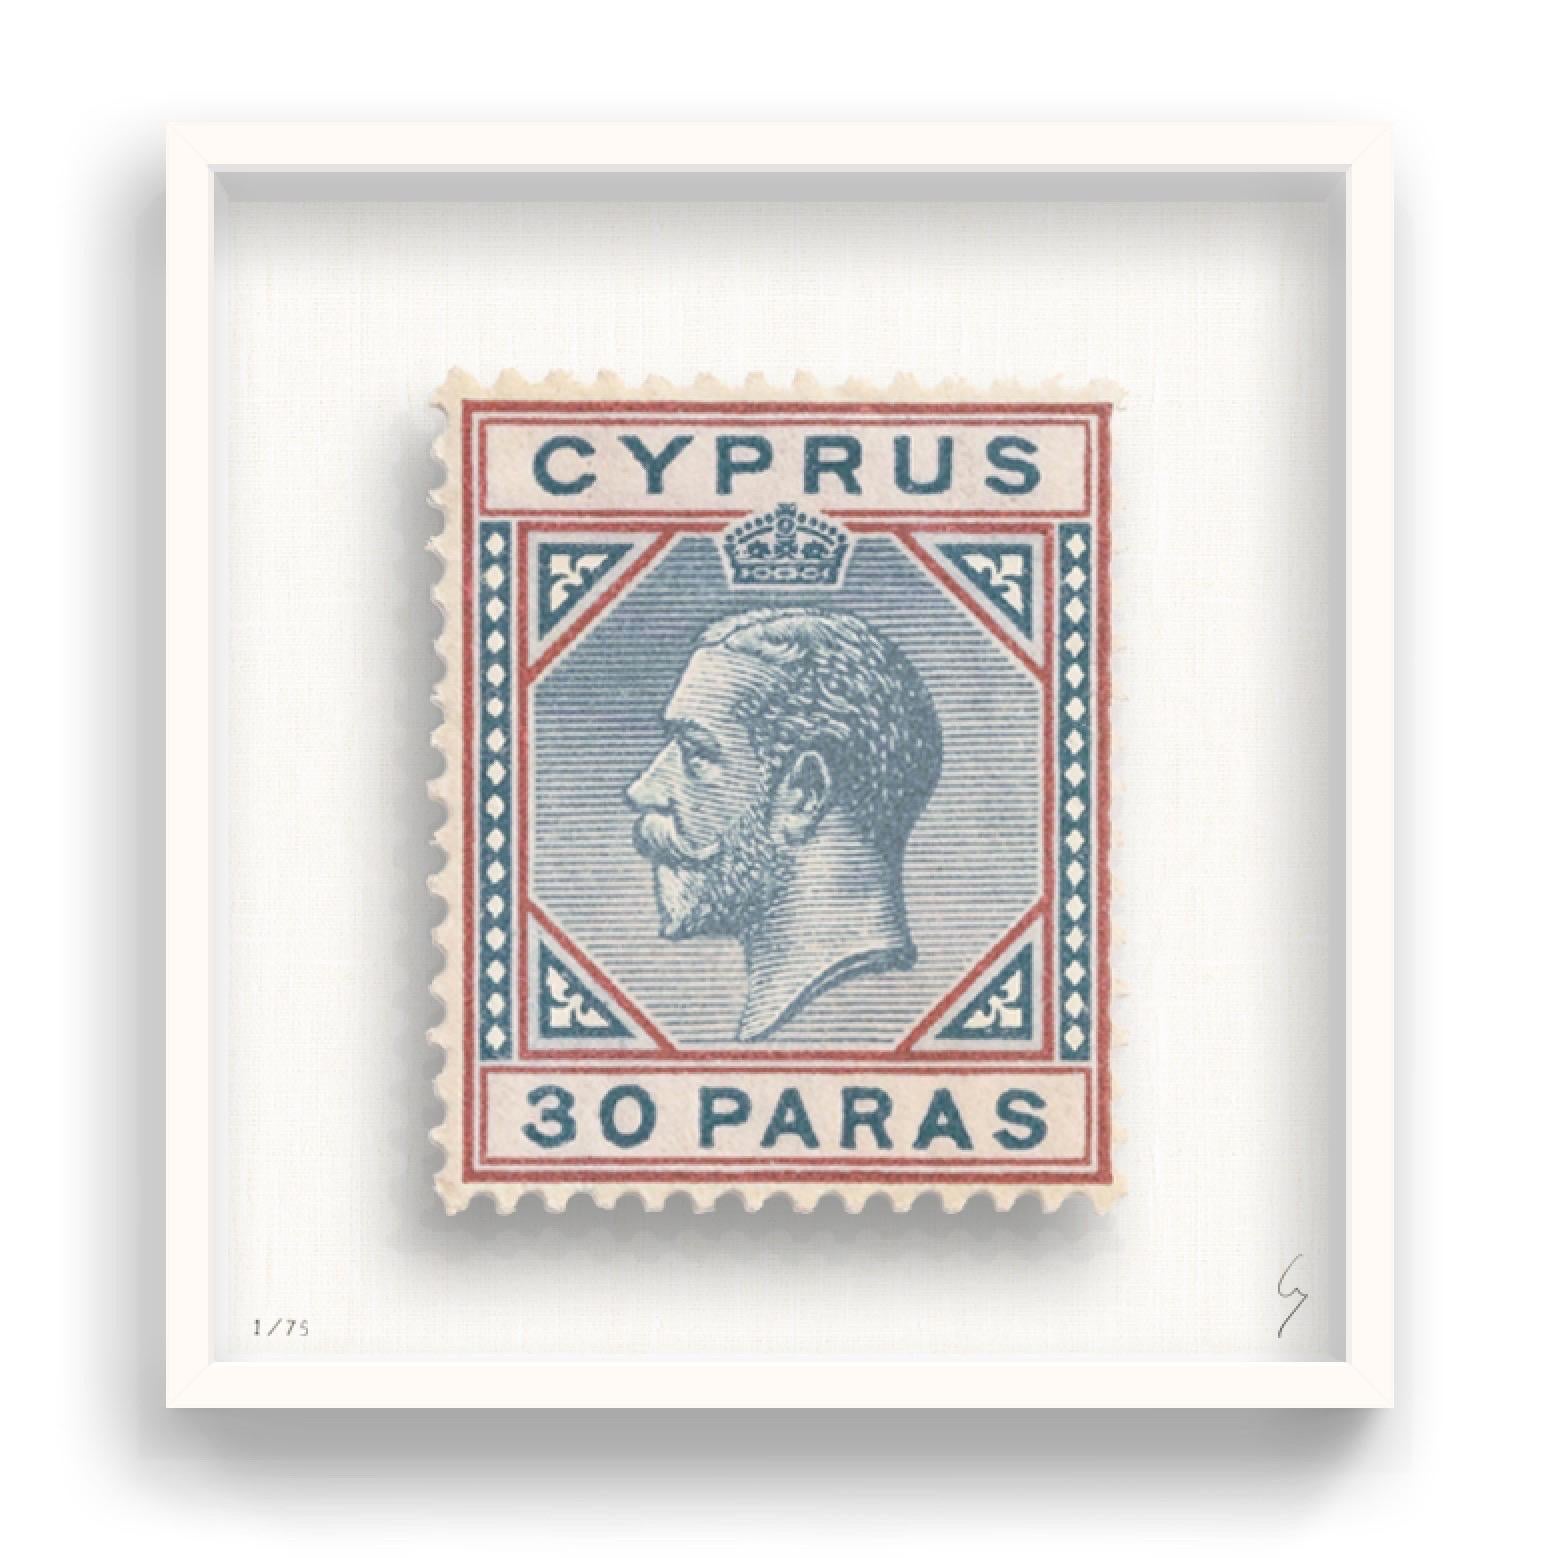 Guy Gee, Cyprus (medium)

Hand-engraved print on 350gsm on G.F Smith card
53 x 56cm (20 4/5 x 22 2/5 in)
Frame included 
Edition of 75 

Each artwork by Guy had been digitally reimagined from an original postage stamp. Cut out and finished by hand,